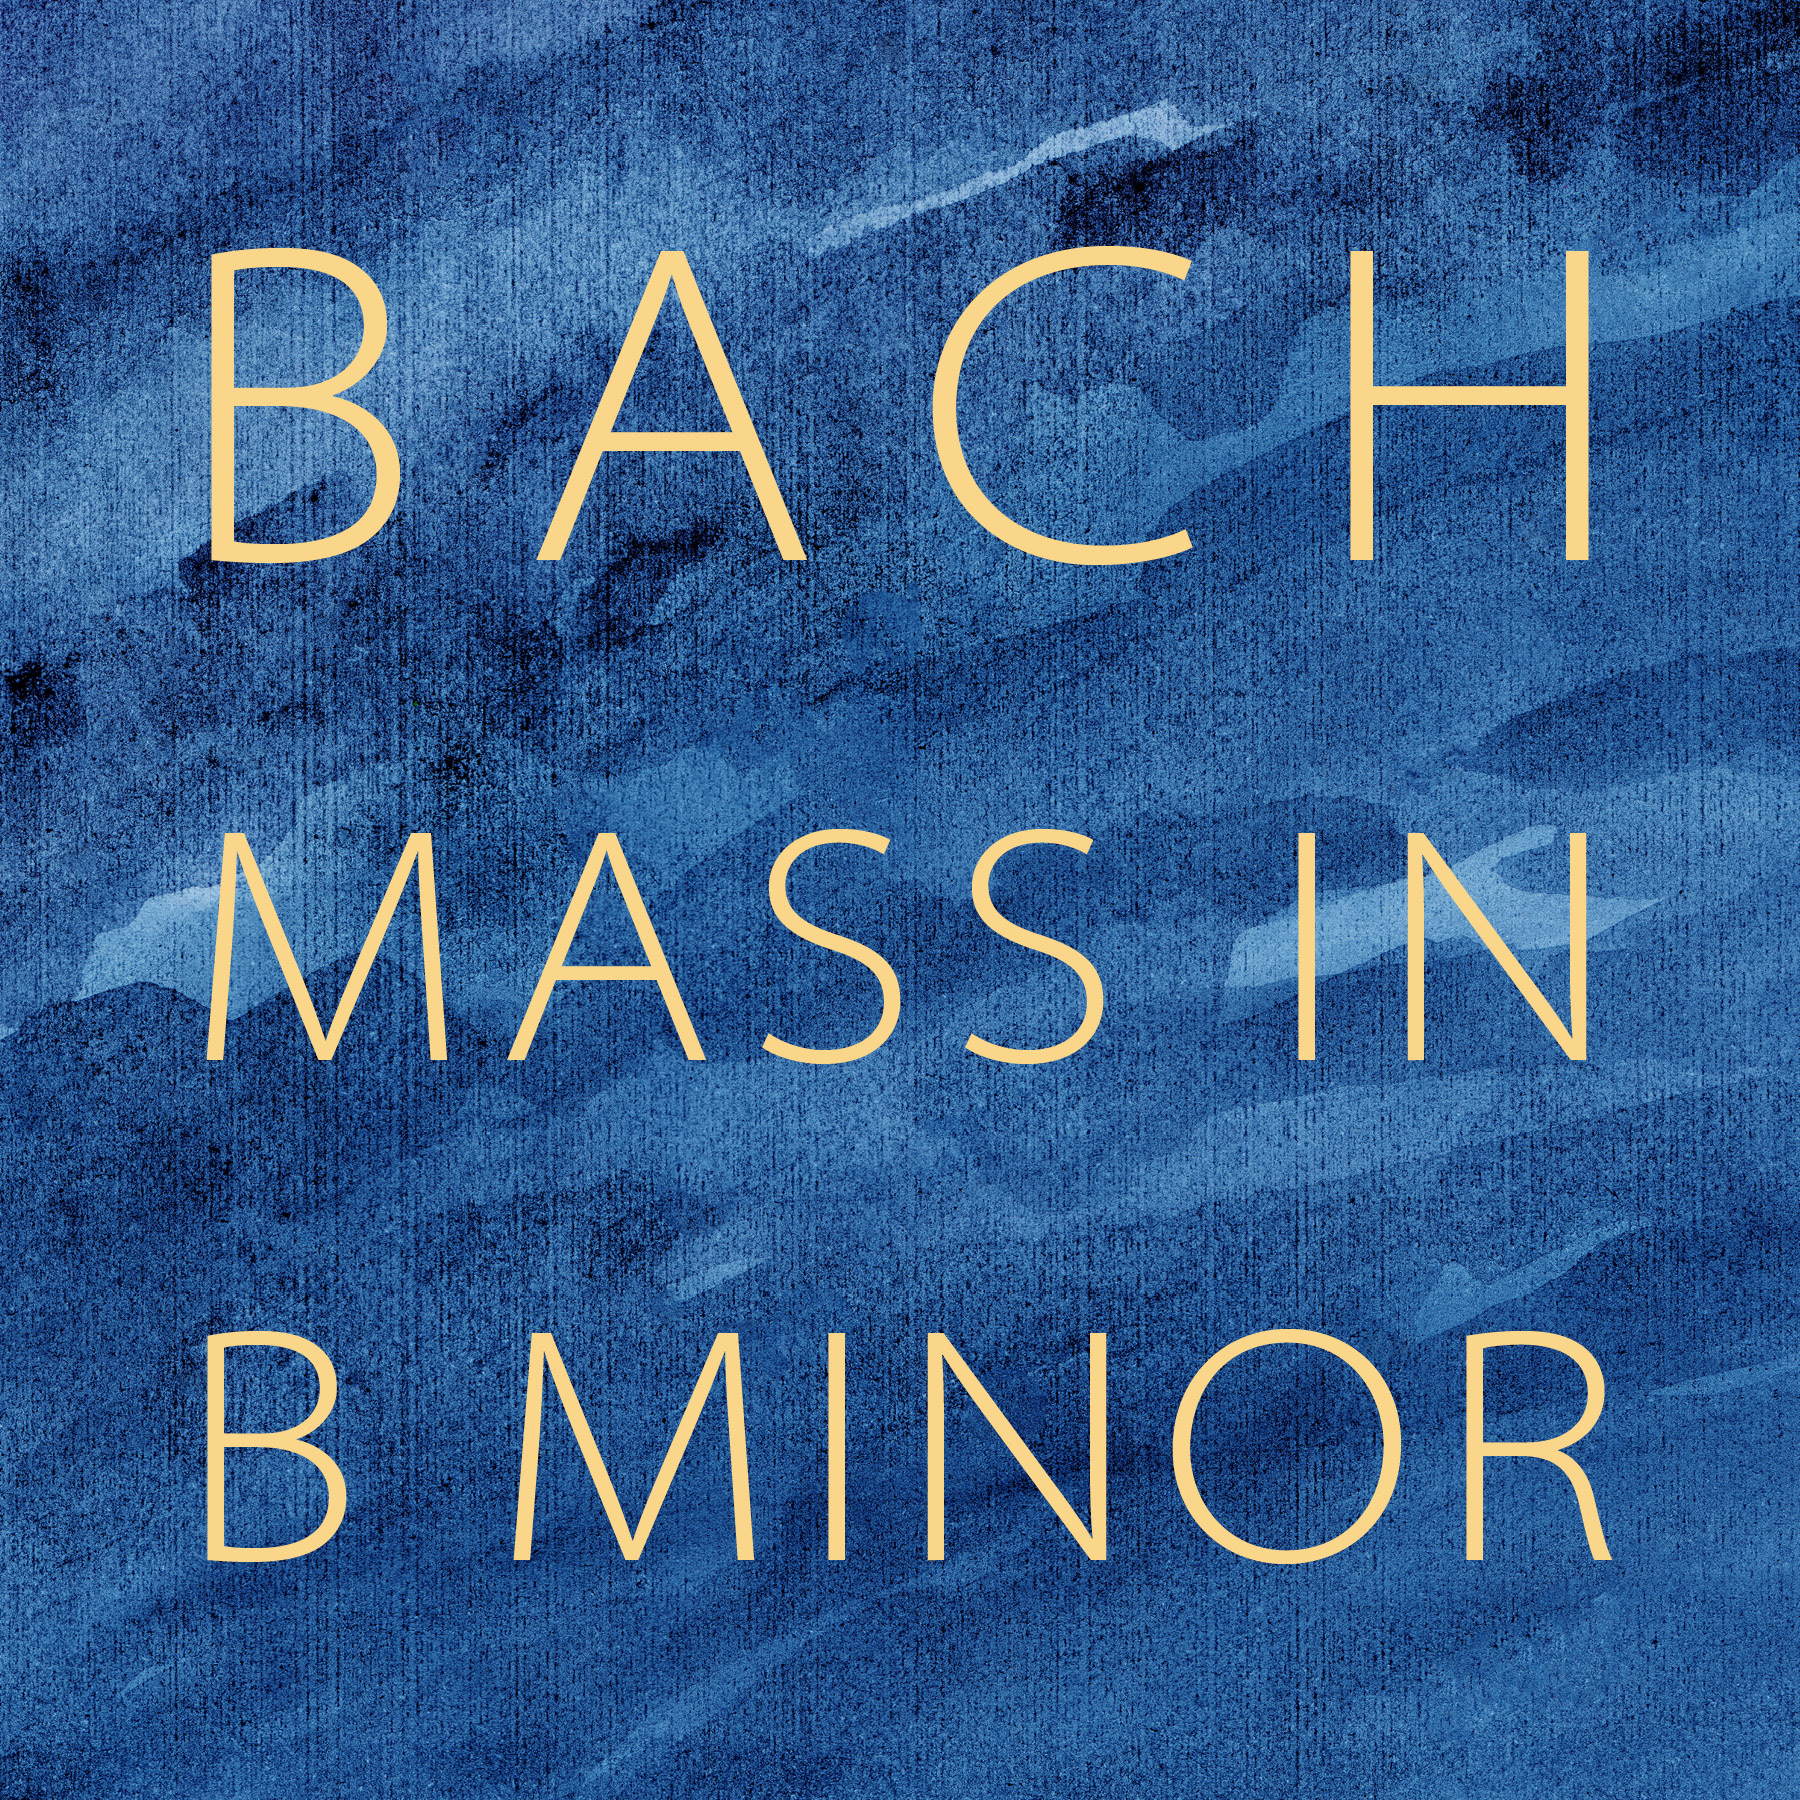 Bach Mass in B Minor text on blue abstract background